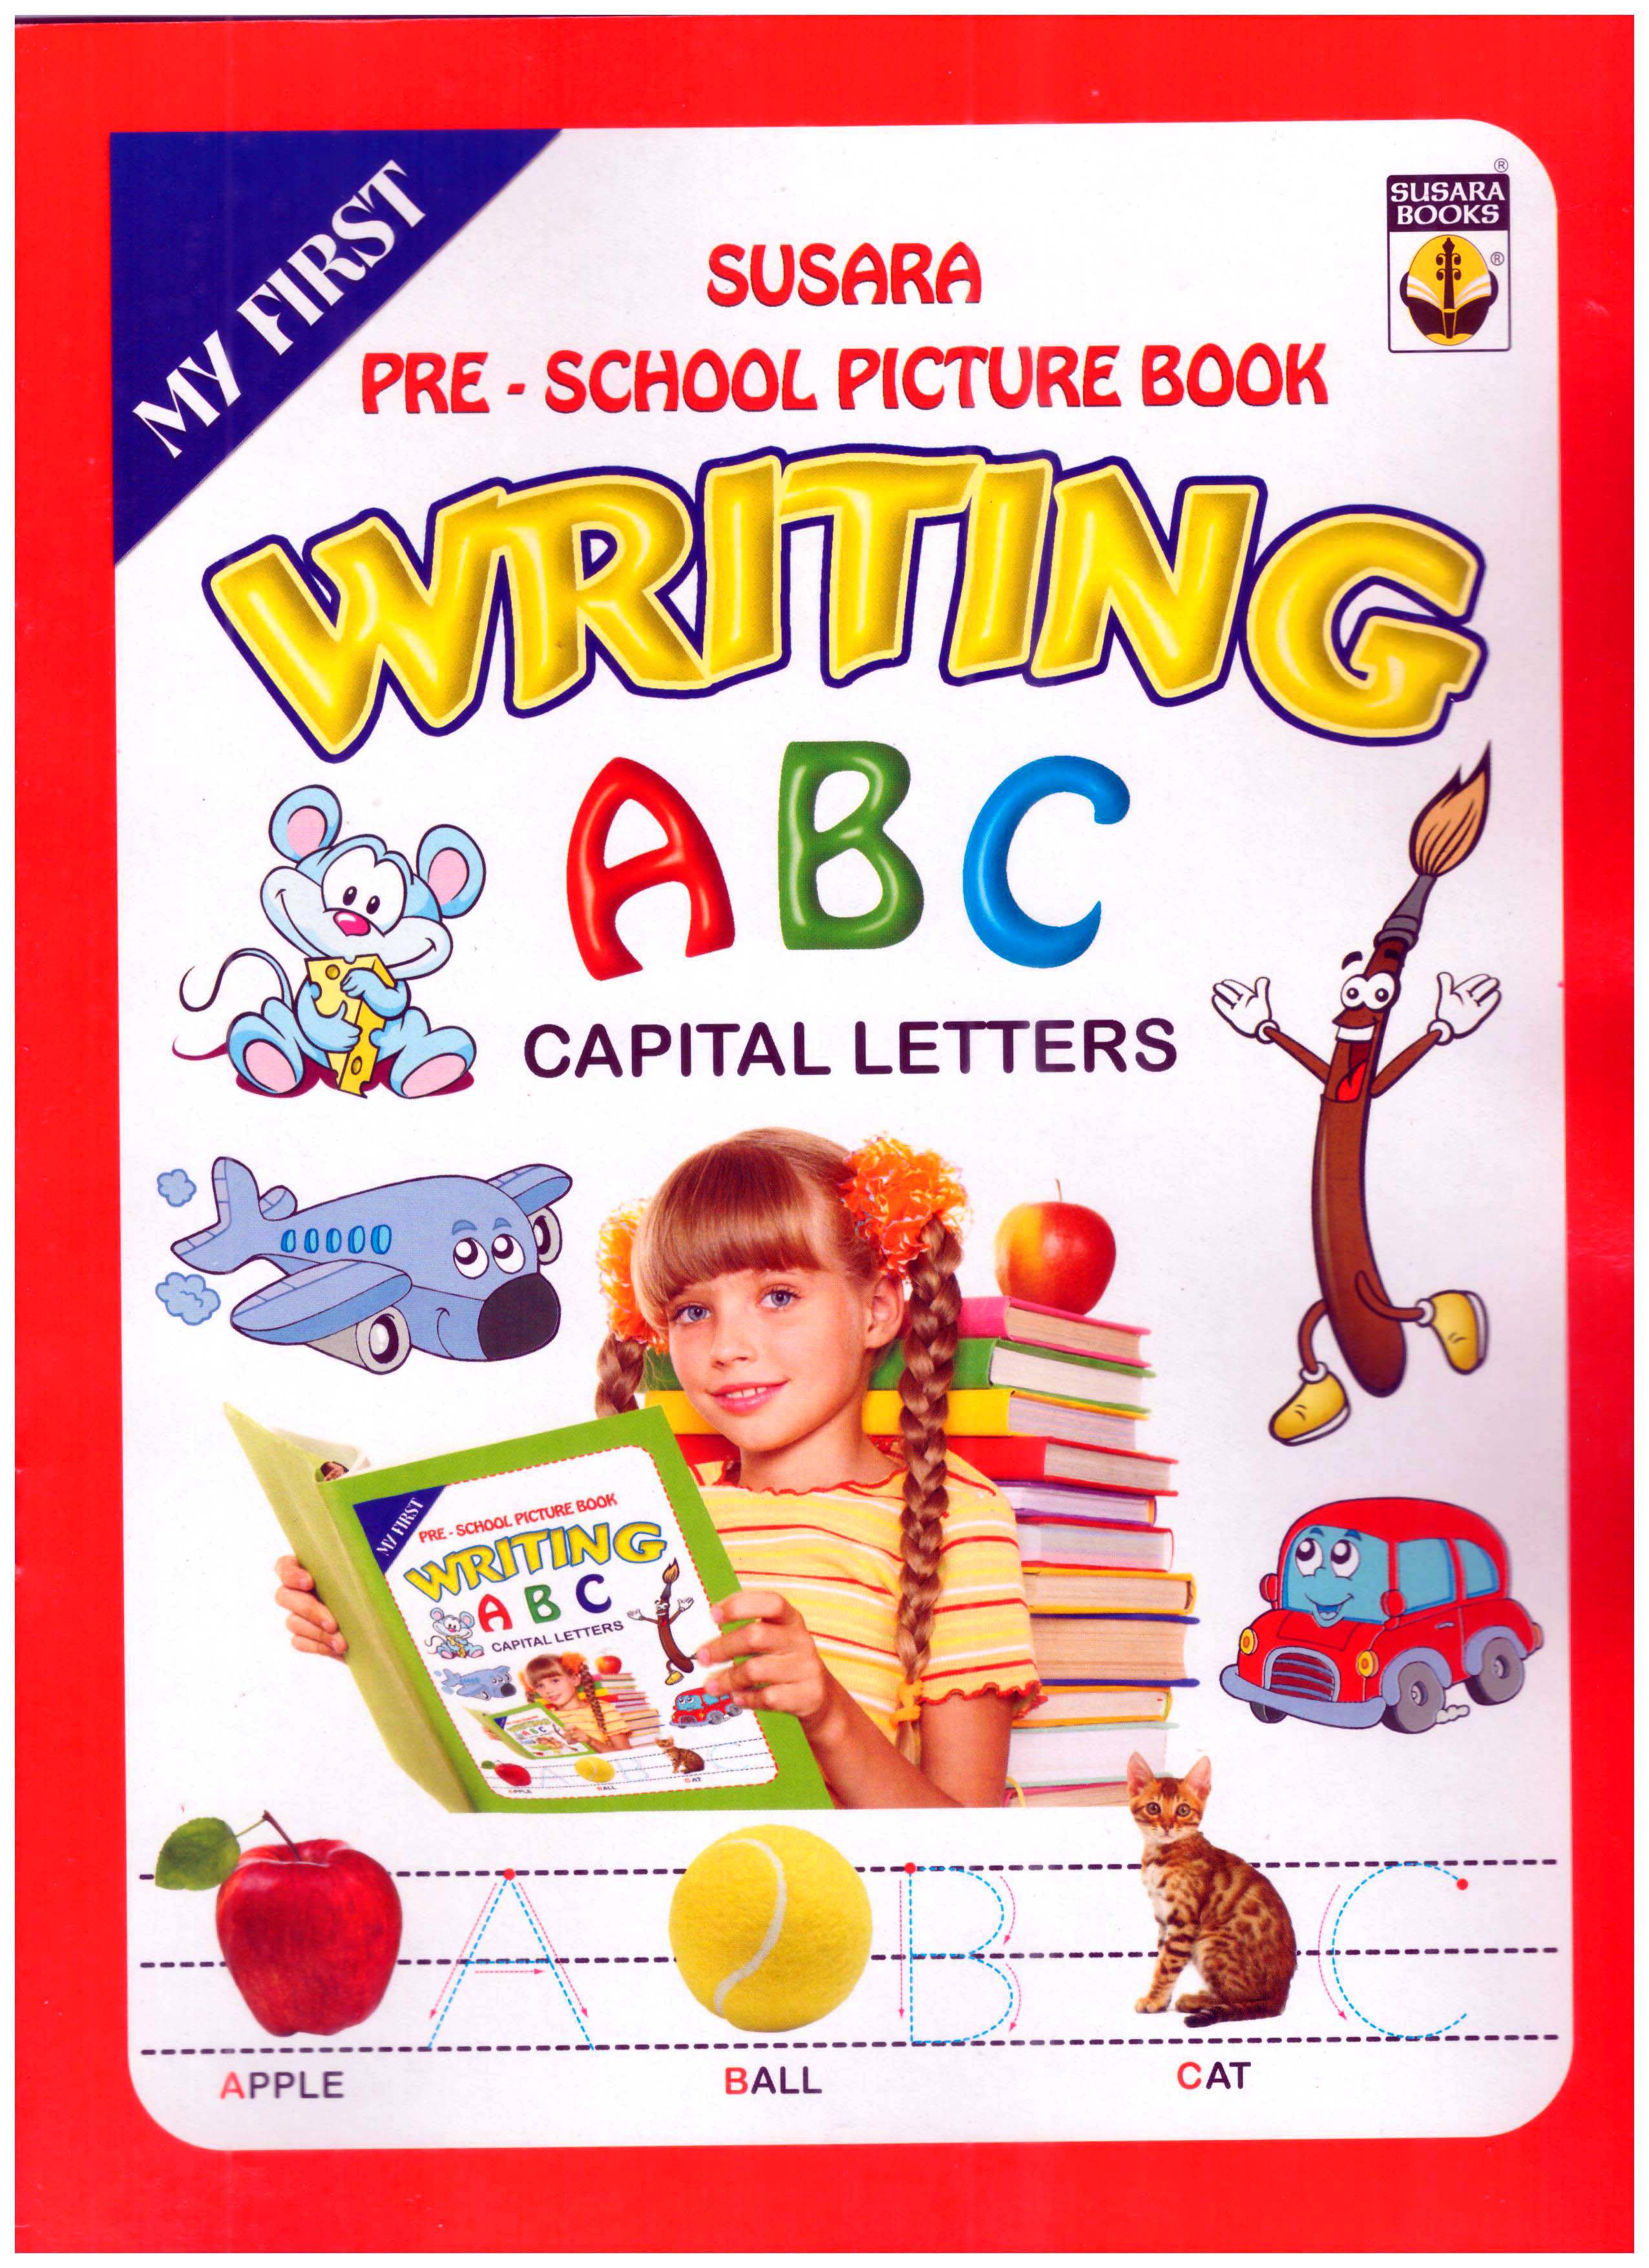 My First Susara Pre-School Picture Book Writing ABC Capital Letters